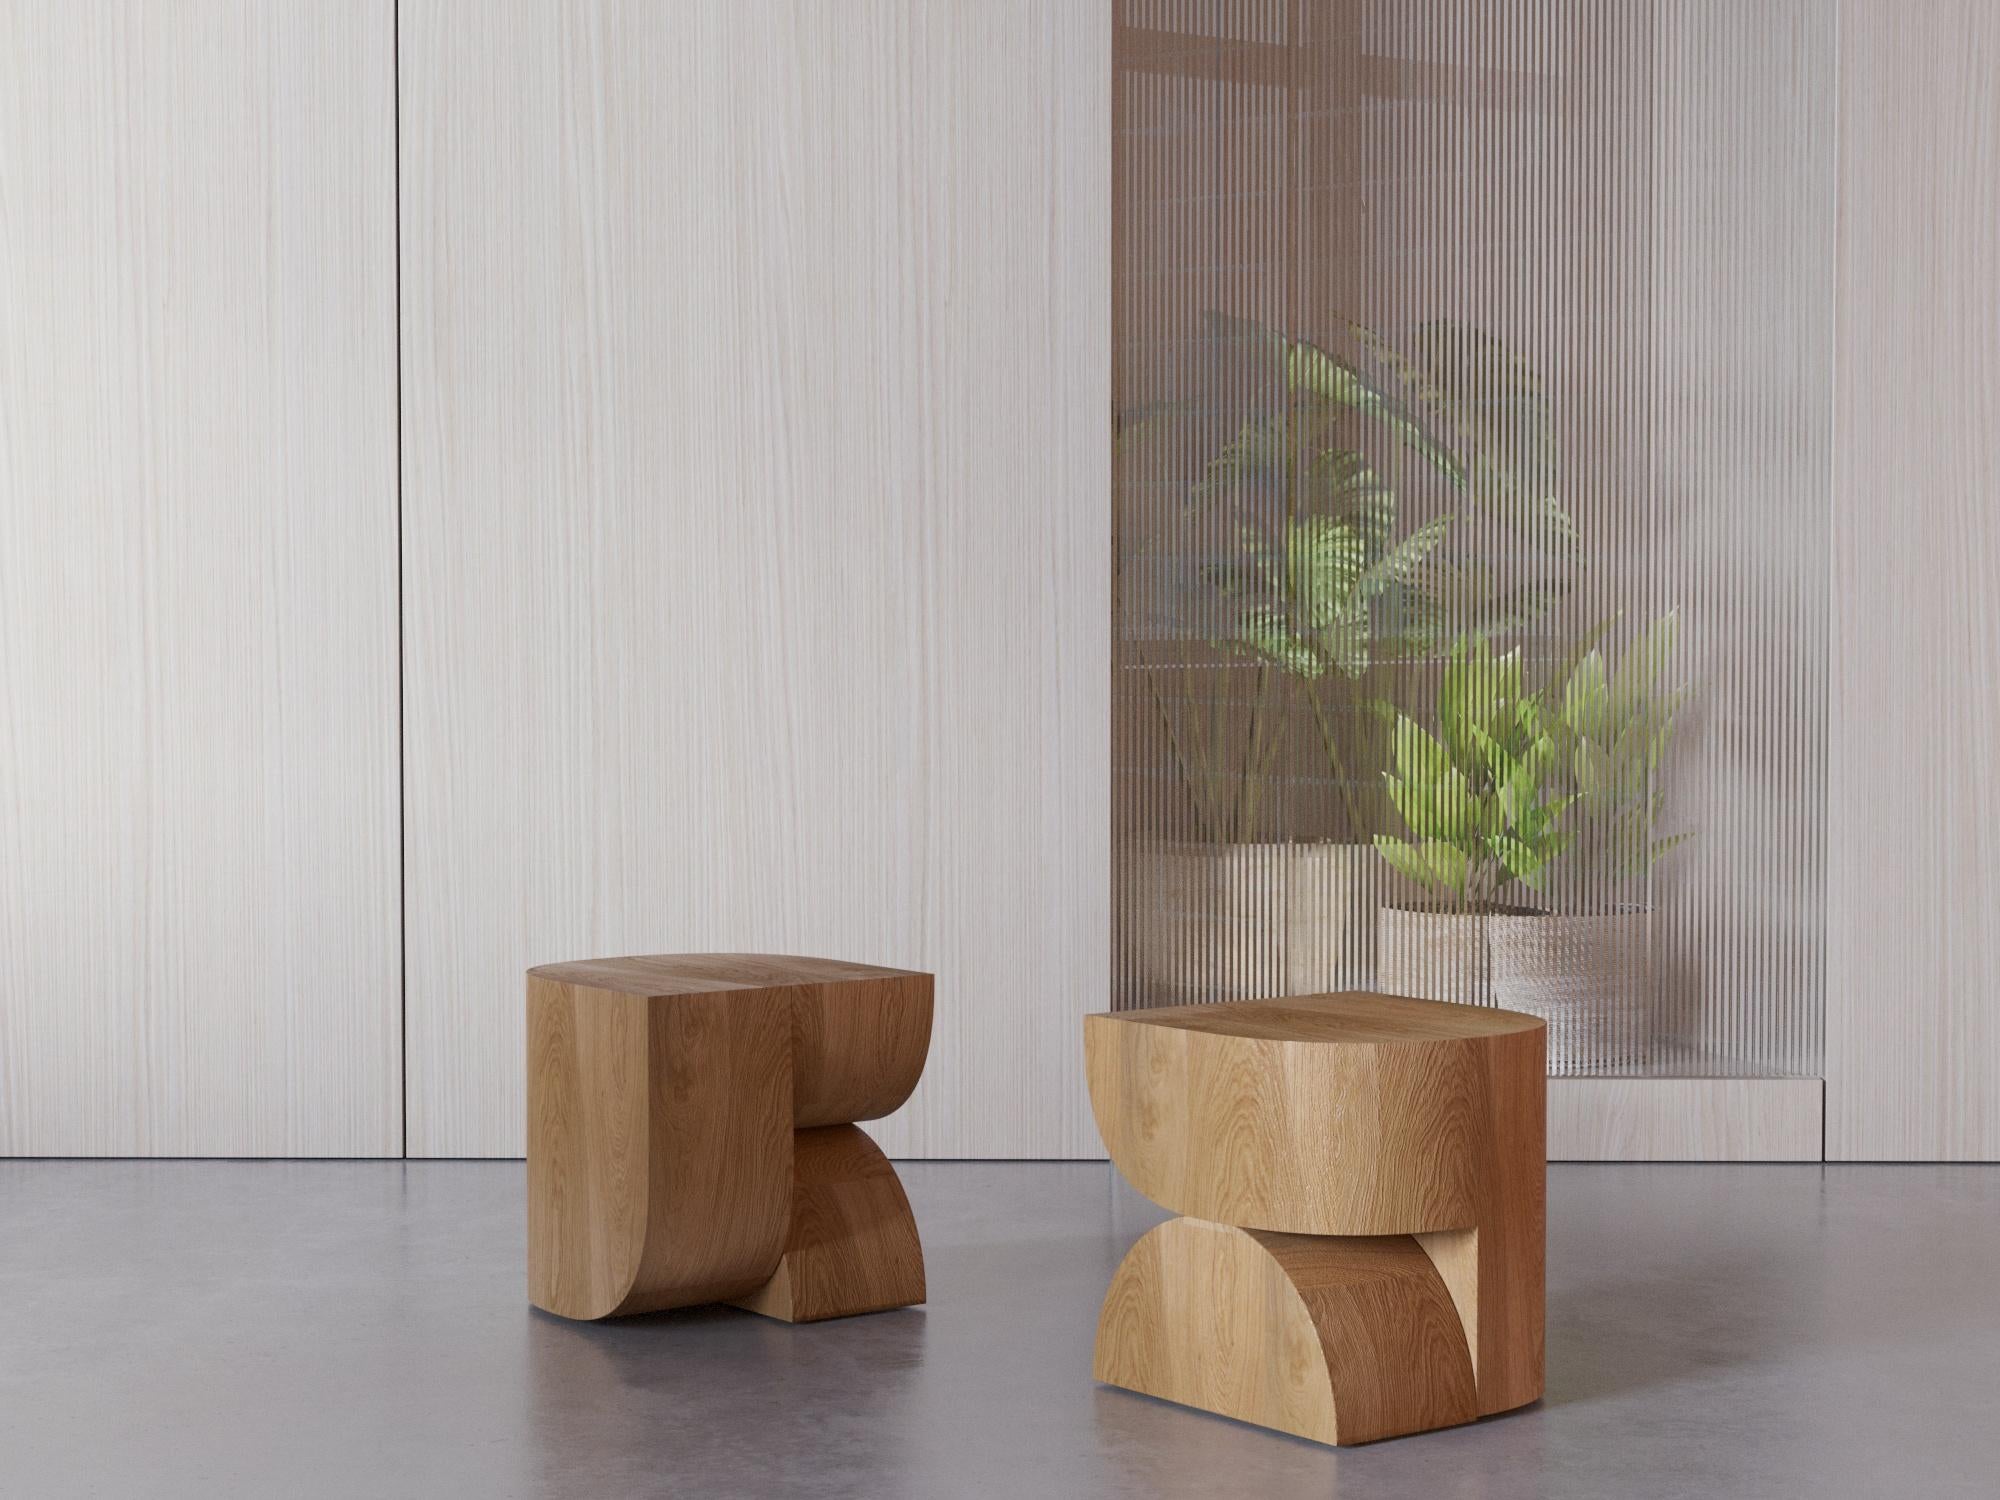 FACE, inspired by modernism and boldly combining simple geometries, is a functional design that can be used as a complement in almost any space, while displaying an aesthetic stance with its unique design. This versatile piece of furniture adds a